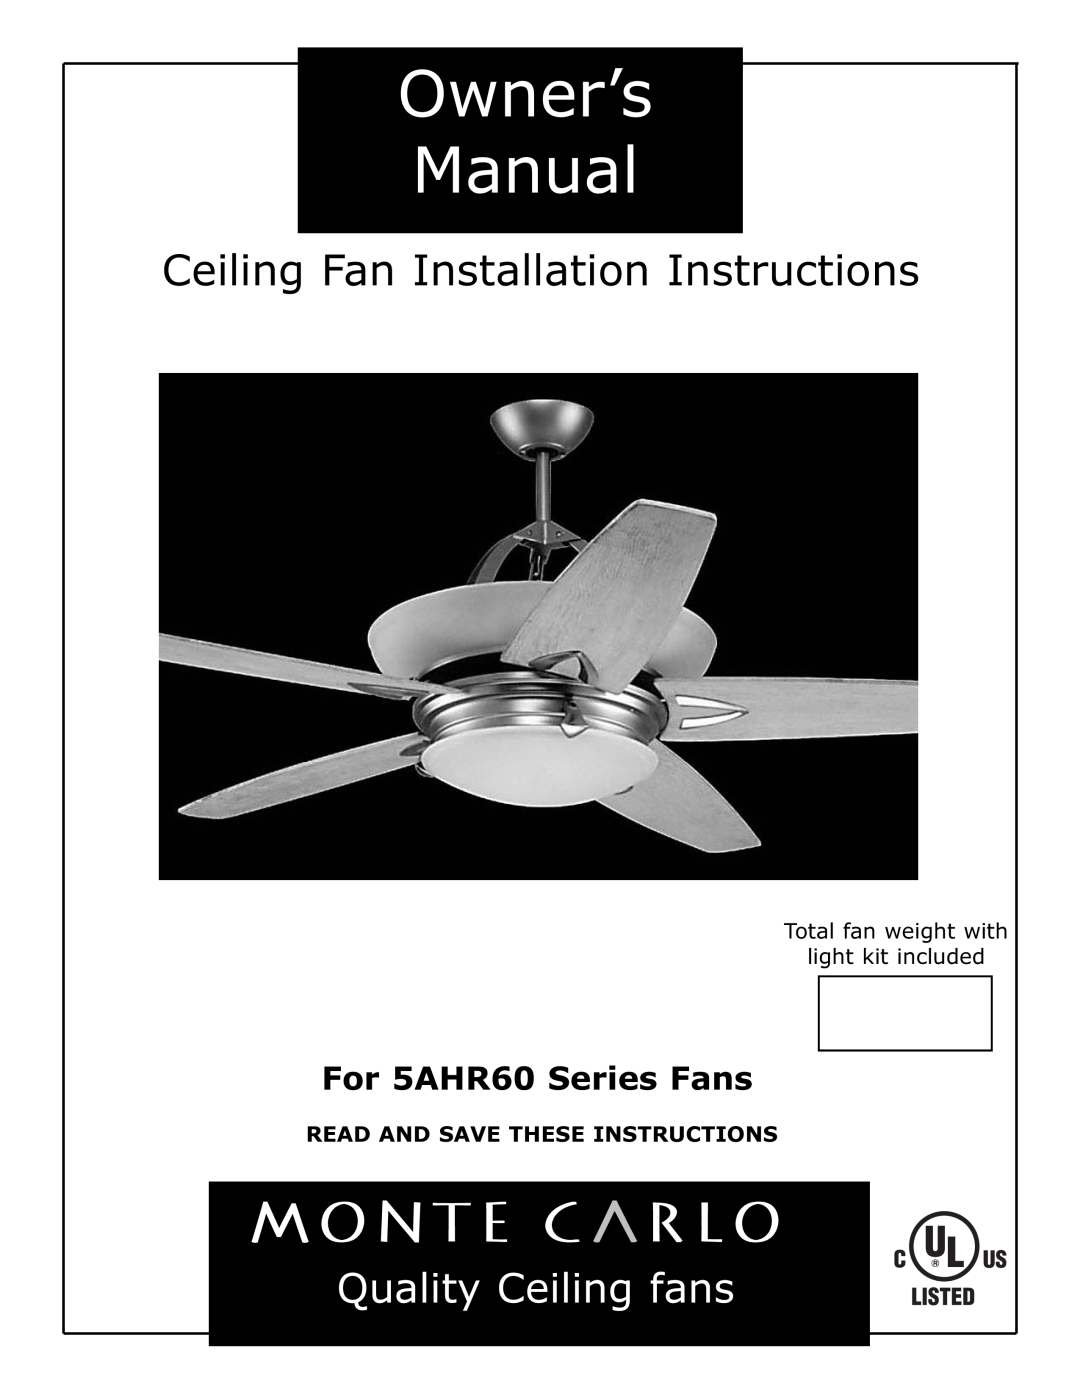 Monte Carlo Fan Company 5AHR60 owner manual Ceiling Fan Installation Instructions, Quality Ceiling fans 